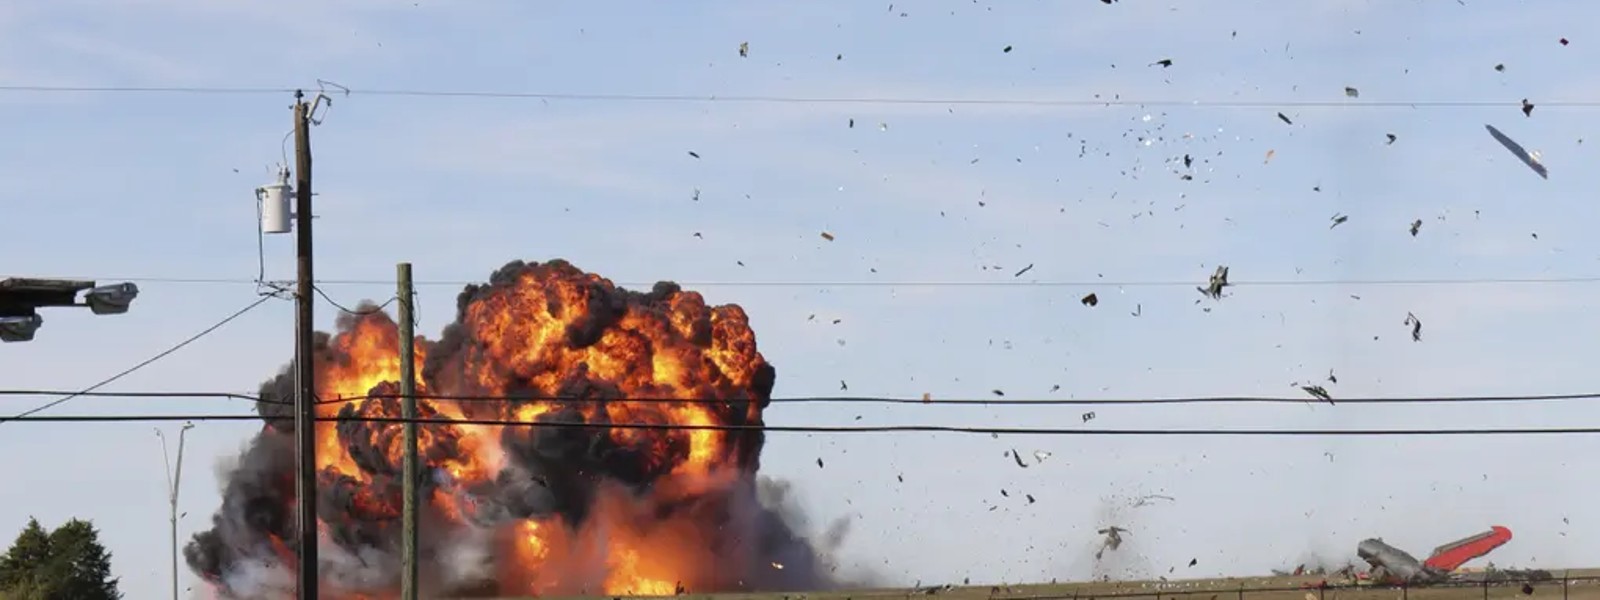 Two aircraft collide and crash at WW2 airshow